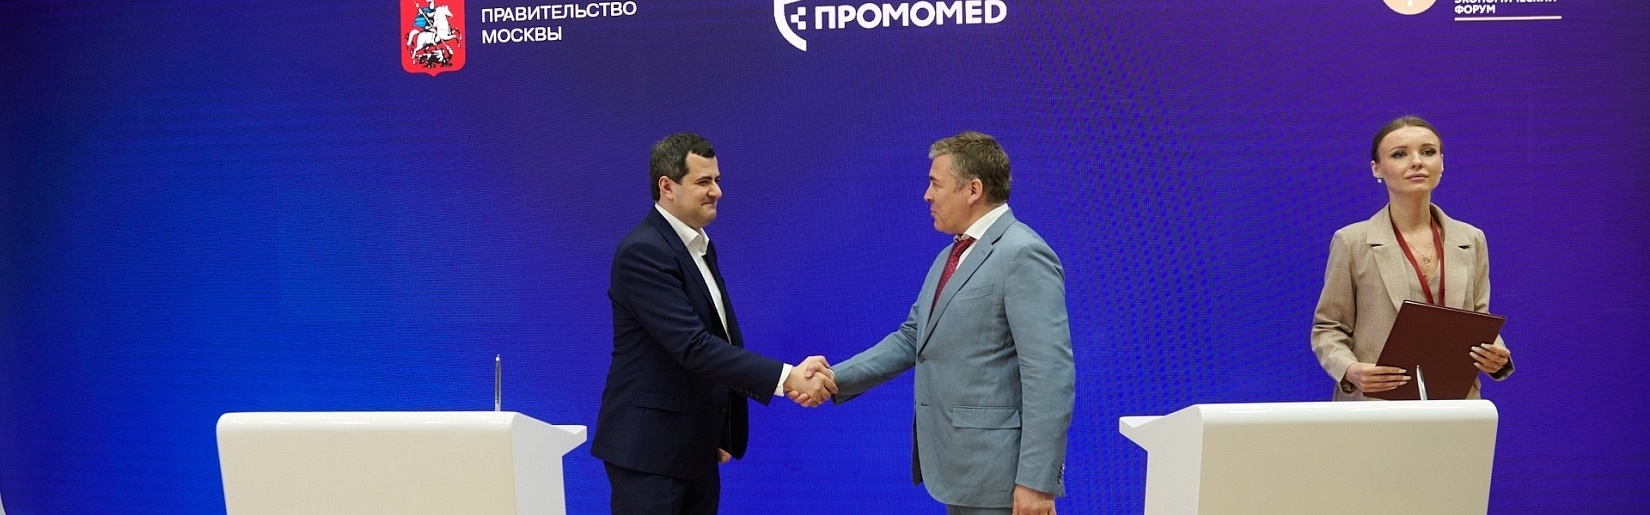 Promomed Group and the Department of Investment and Industrial Policy of the city of Moscow signed an agreement in the field of biotechnology development